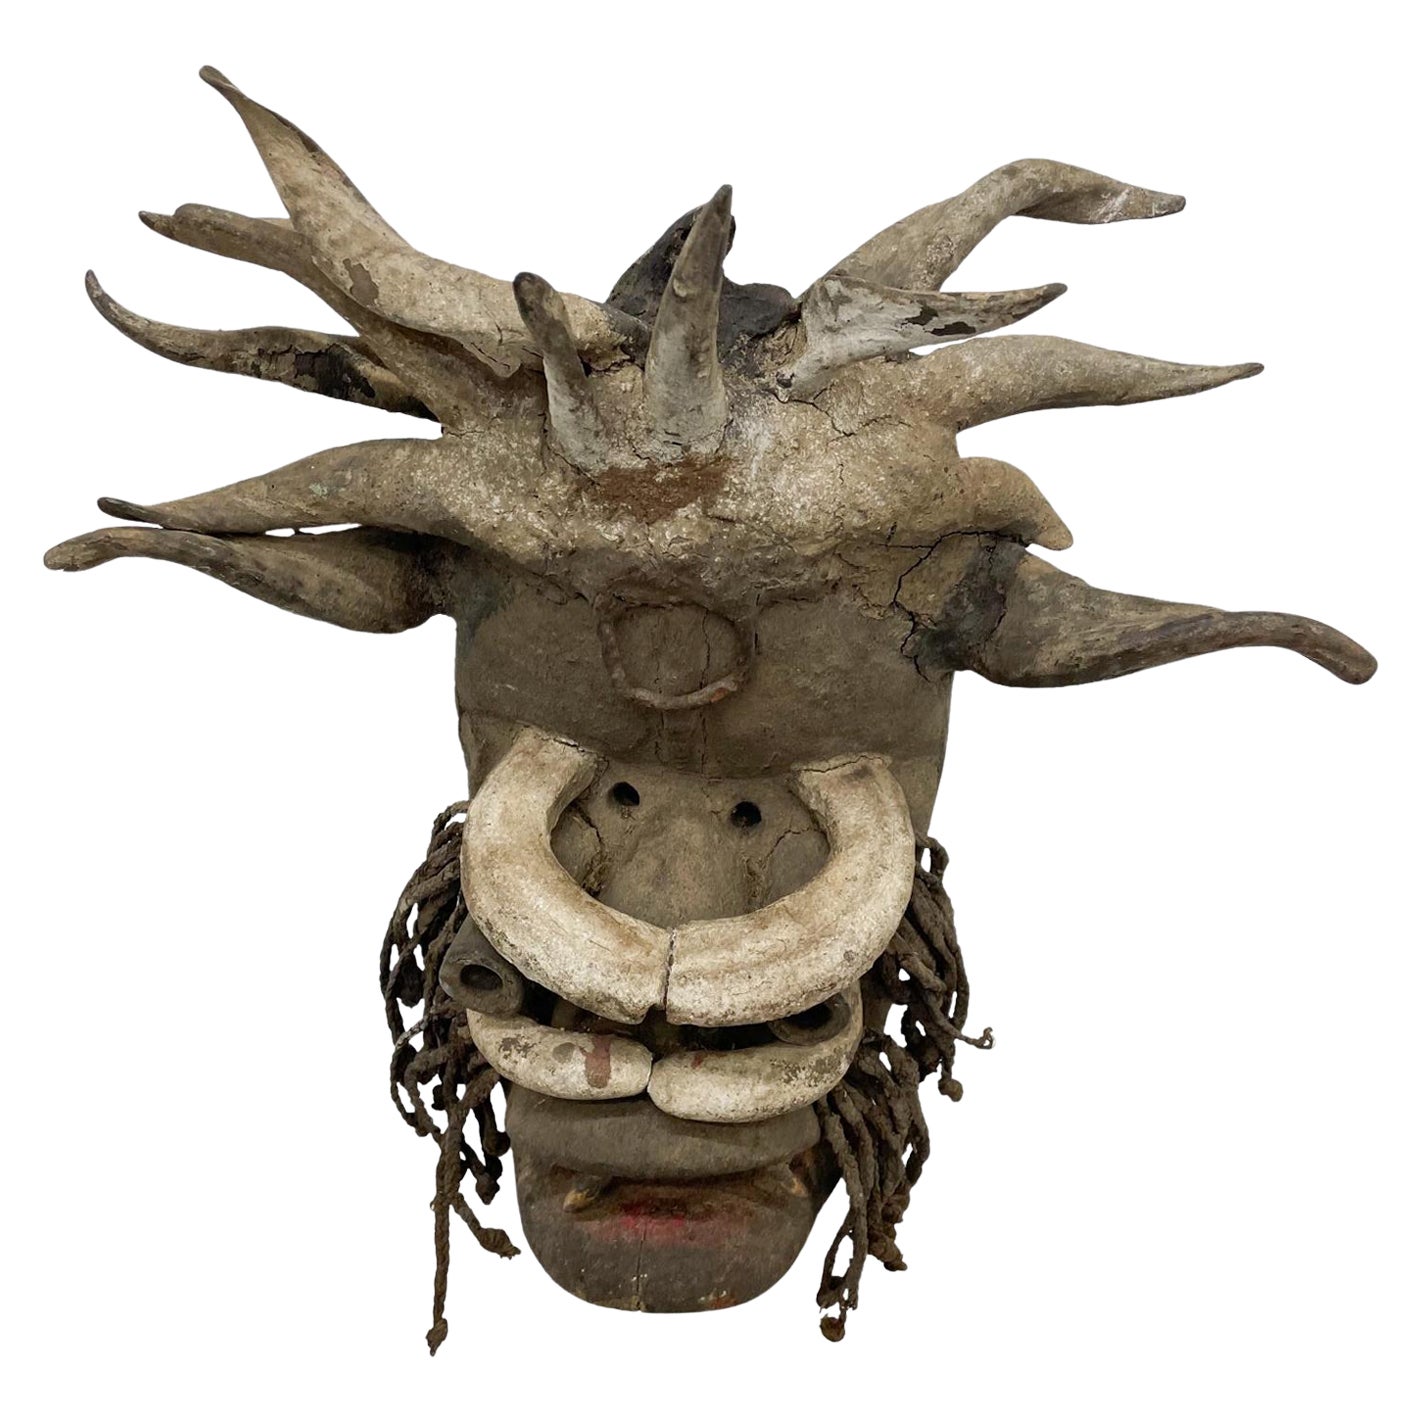 African Mask
Style of Powerful and Sacred African Dan mask Wall art decor Sculpture in wood
Measures: 15.75 width x 16 tall x 10.25 depth
Unattributed.
Preowned unrestored original vintage condition. Wood with vintage patina. 
Wear present.